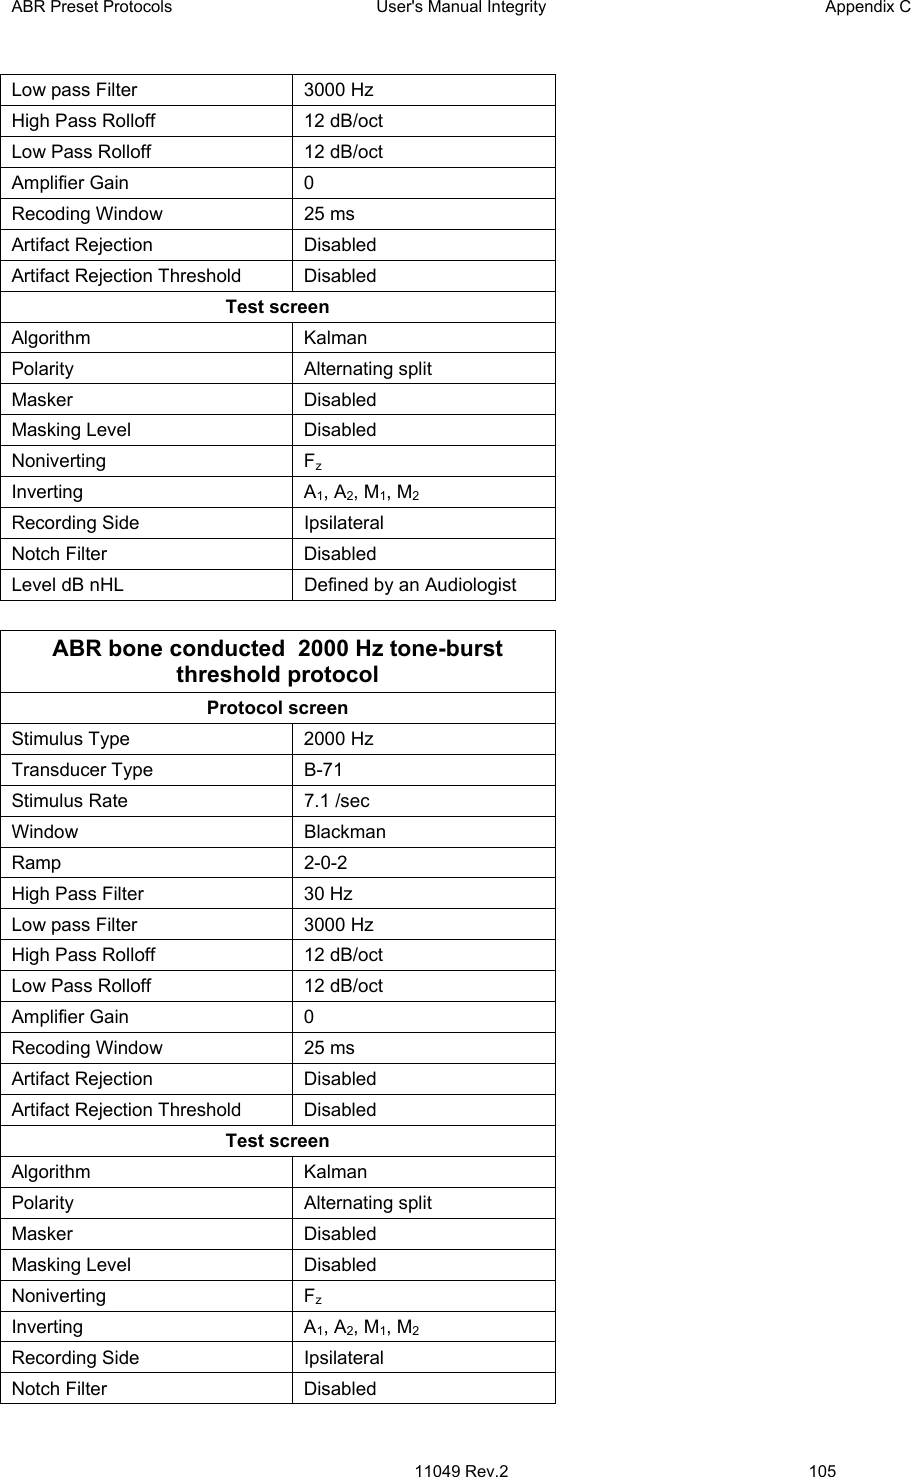 ABR Preset Protocols  User&apos;s Manual Integrity  Appendix C  11049 Rev.2 105   Low pass Filter  3000 Hz High Pass Rolloff  12 dB/oct Low Pass Rolloff  12 dB/oct Amplifier Gain  0 Recoding Window  25 ms Artifact Rejection  Disabled Artifact Rejection Threshold   Disabled Test screen Algorithm Kalman Polarity Alternating split Masker Disabled Masking Level  Disabled Noniverting Fz Inverting A1, A2, M1, M2 Recording Side  Ipsilateral Notch Filter  Disabled Level dB nHL  Defined by an Audiologist  ABR bone conducted  2000 Hz tone-burst threshold protocol  Protocol screen Stimulus Type  2000 Hz Transducer Type  B-71 Stimulus Rate  7.1 /sec Window Blackman  Ramp 2-0-2 High Pass Filter  30 Hz Low pass Filter  3000 Hz High Pass Rolloff  12 dB/oct Low Pass Rolloff  12 dB/oct Amplifier Gain  0 Recoding Window  25 ms Artifact Rejection  Disabled Artifact Rejection Threshold   Disabled Test screen Algorithm Kalman Polarity Alternating split Masker Disabled Masking Level  Disabled Noniverting Fz Inverting A1, A2, M1, M2 Recording Side  Ipsilateral Notch Filter  Disabled 